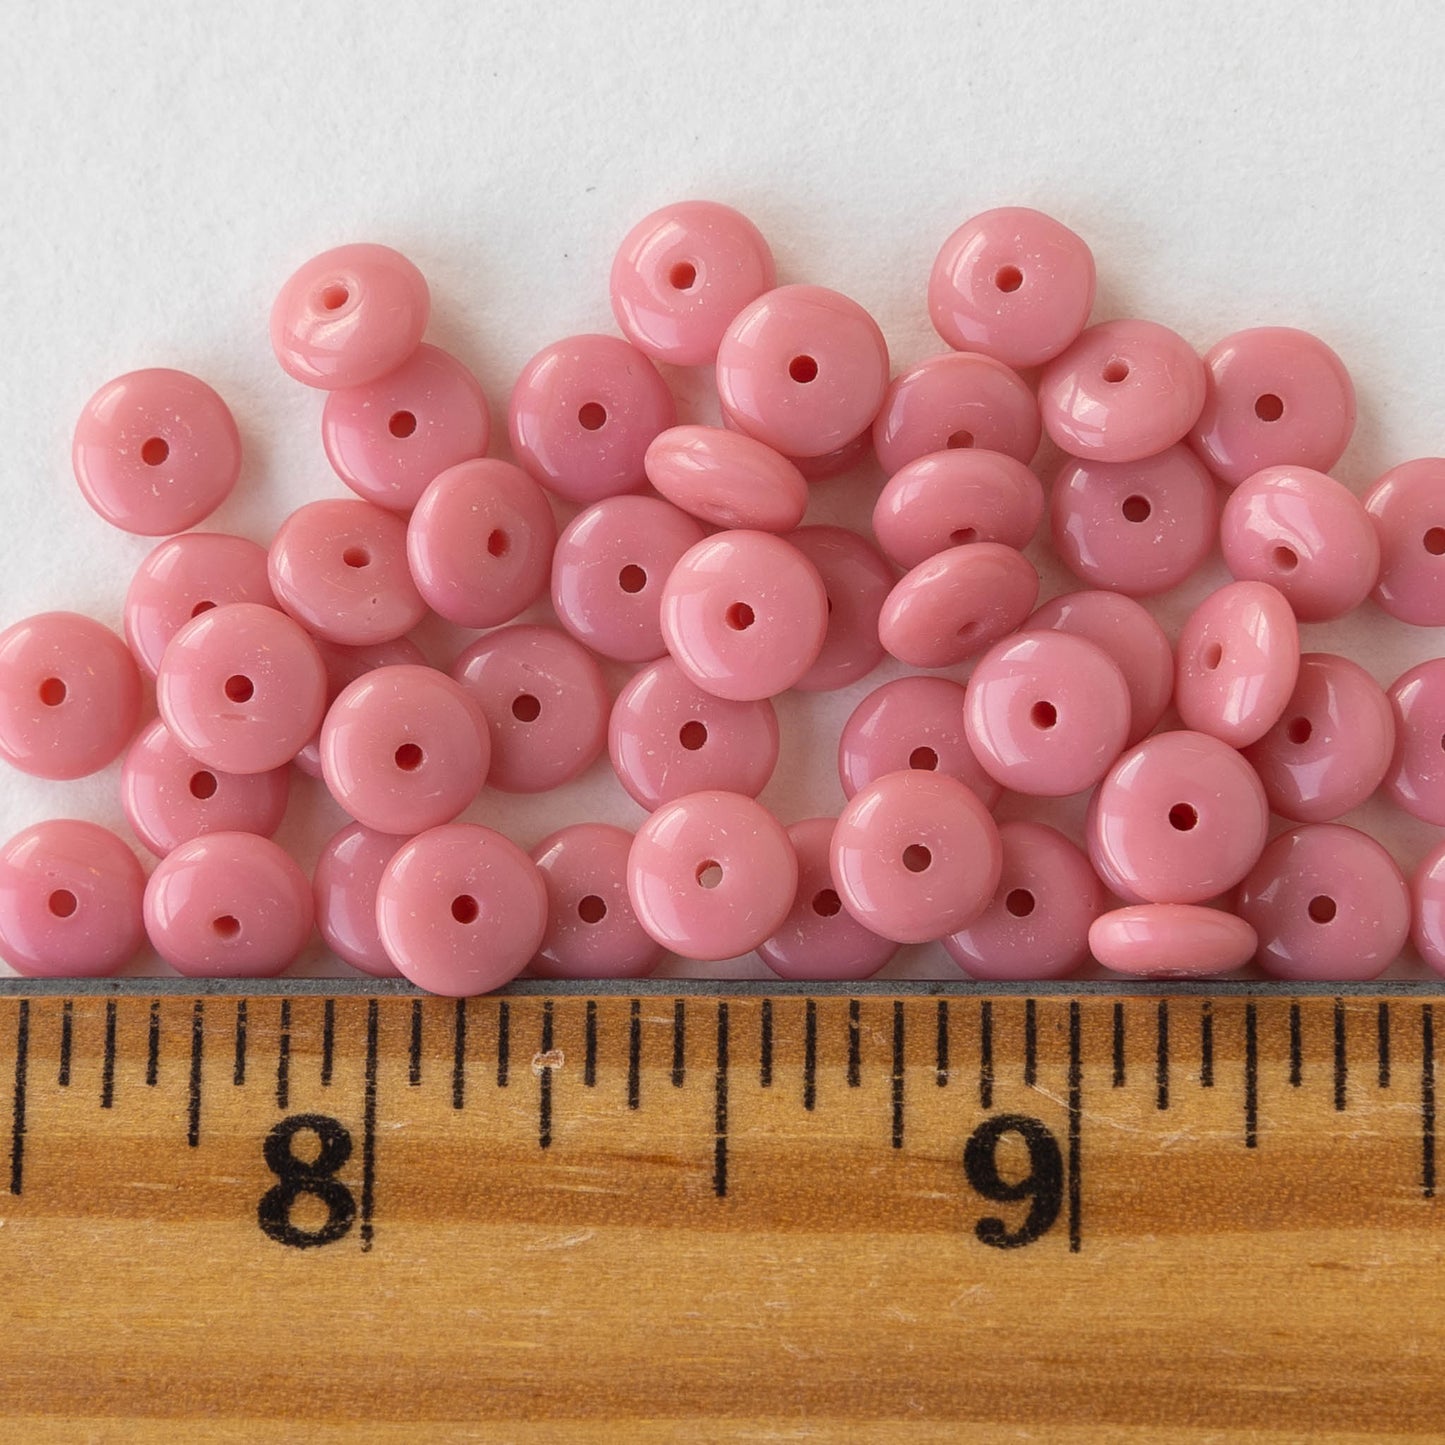 6mm Glass Rondelle Beads - Opaque Pink - 50 Beads